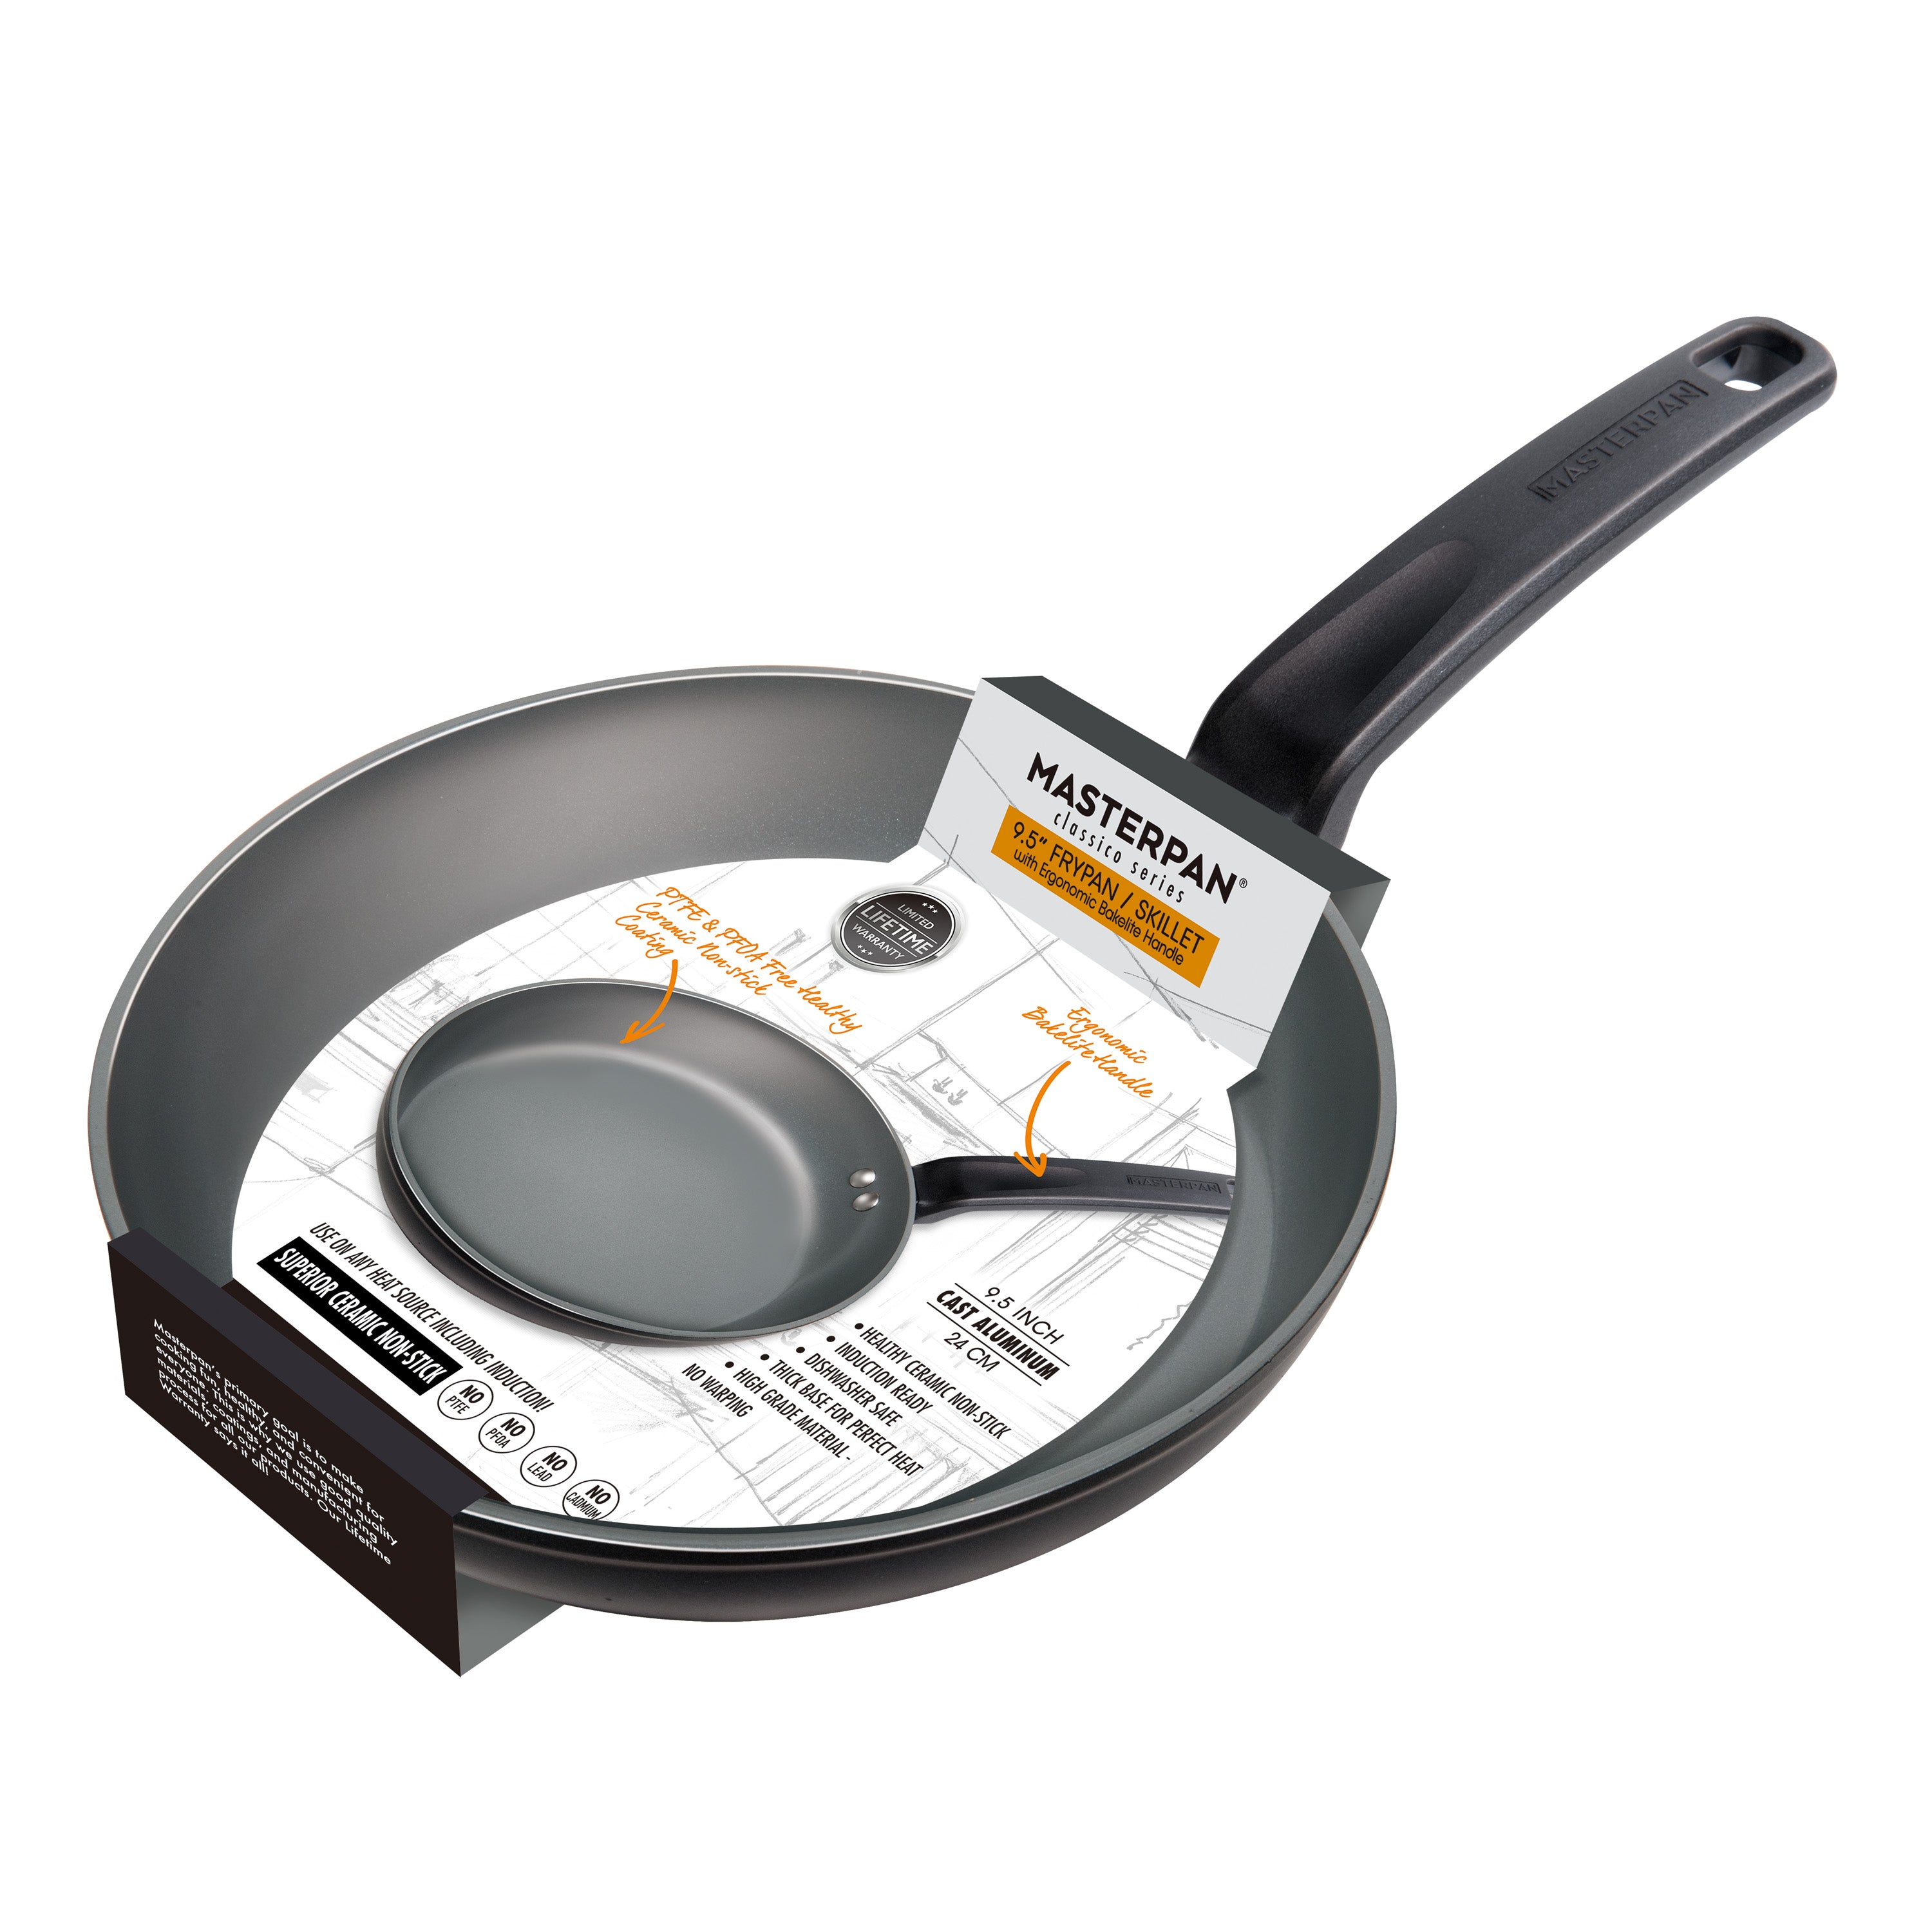 MGC 9.5 inch round frying pan with lid, white Ceramic non-stick coating